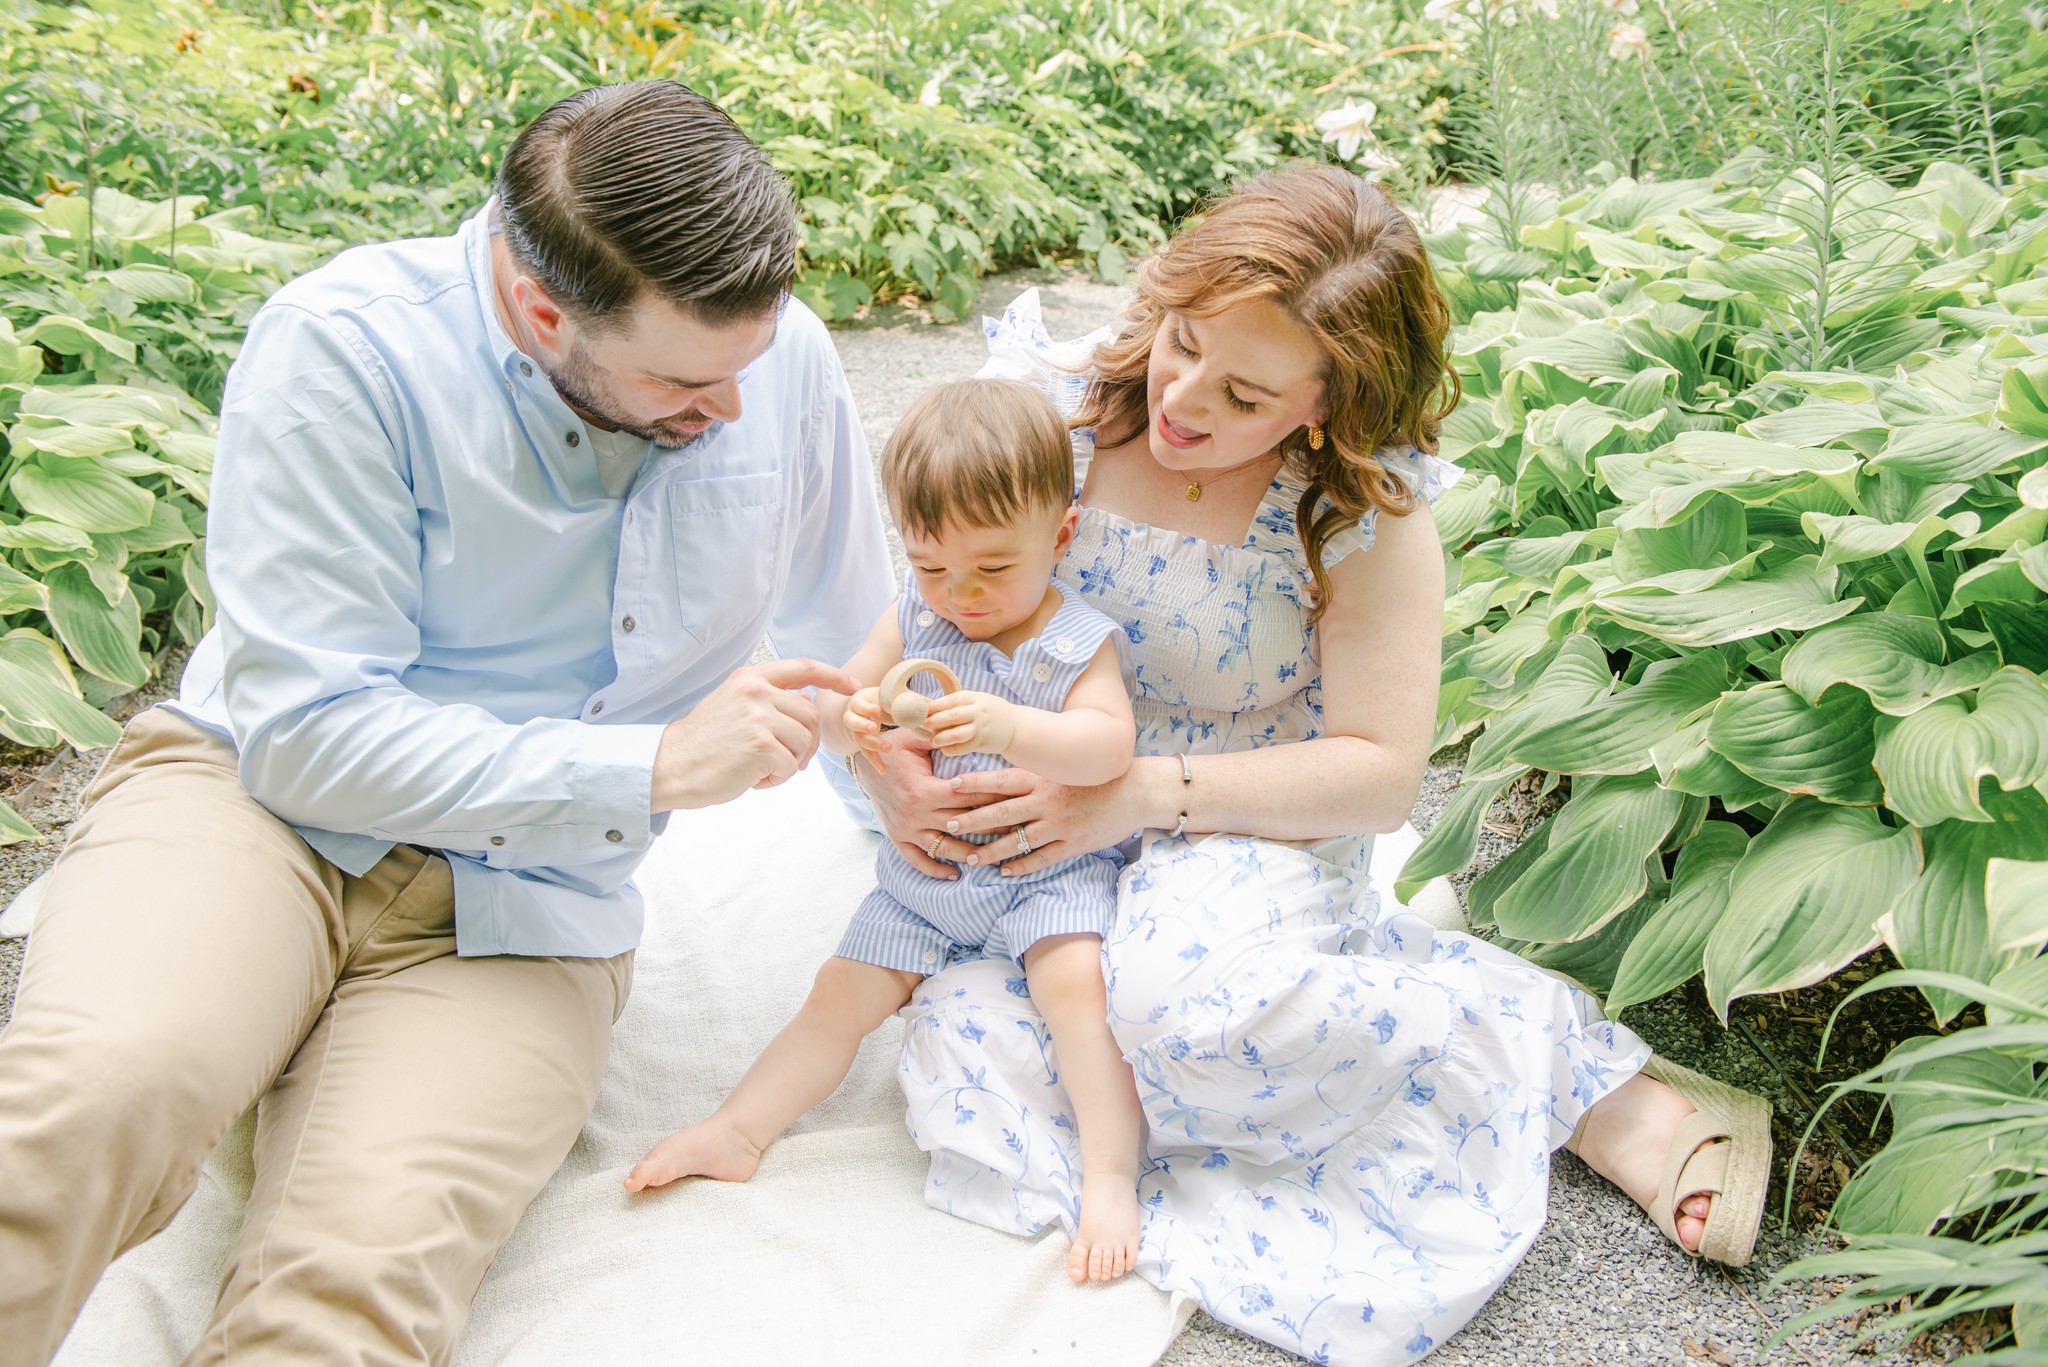 A mother and father sit on a blanket in a gravel garden path playing with their infant son in mom's lap